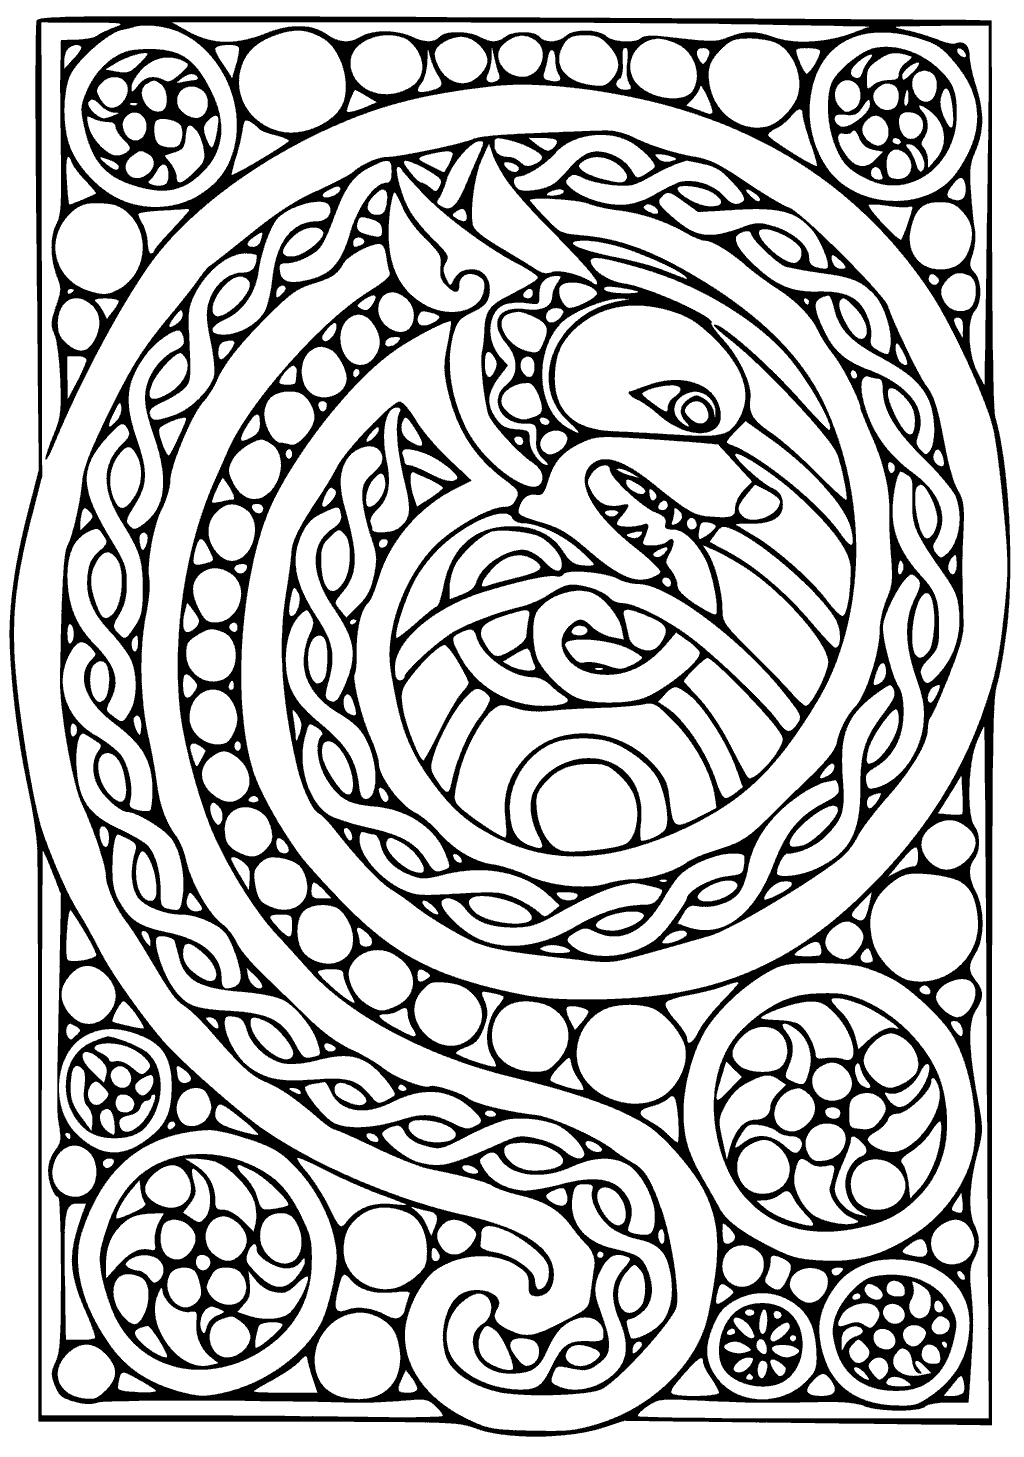 38+ celtic knot coloring pages for adults Adult arianrhod celtic ...